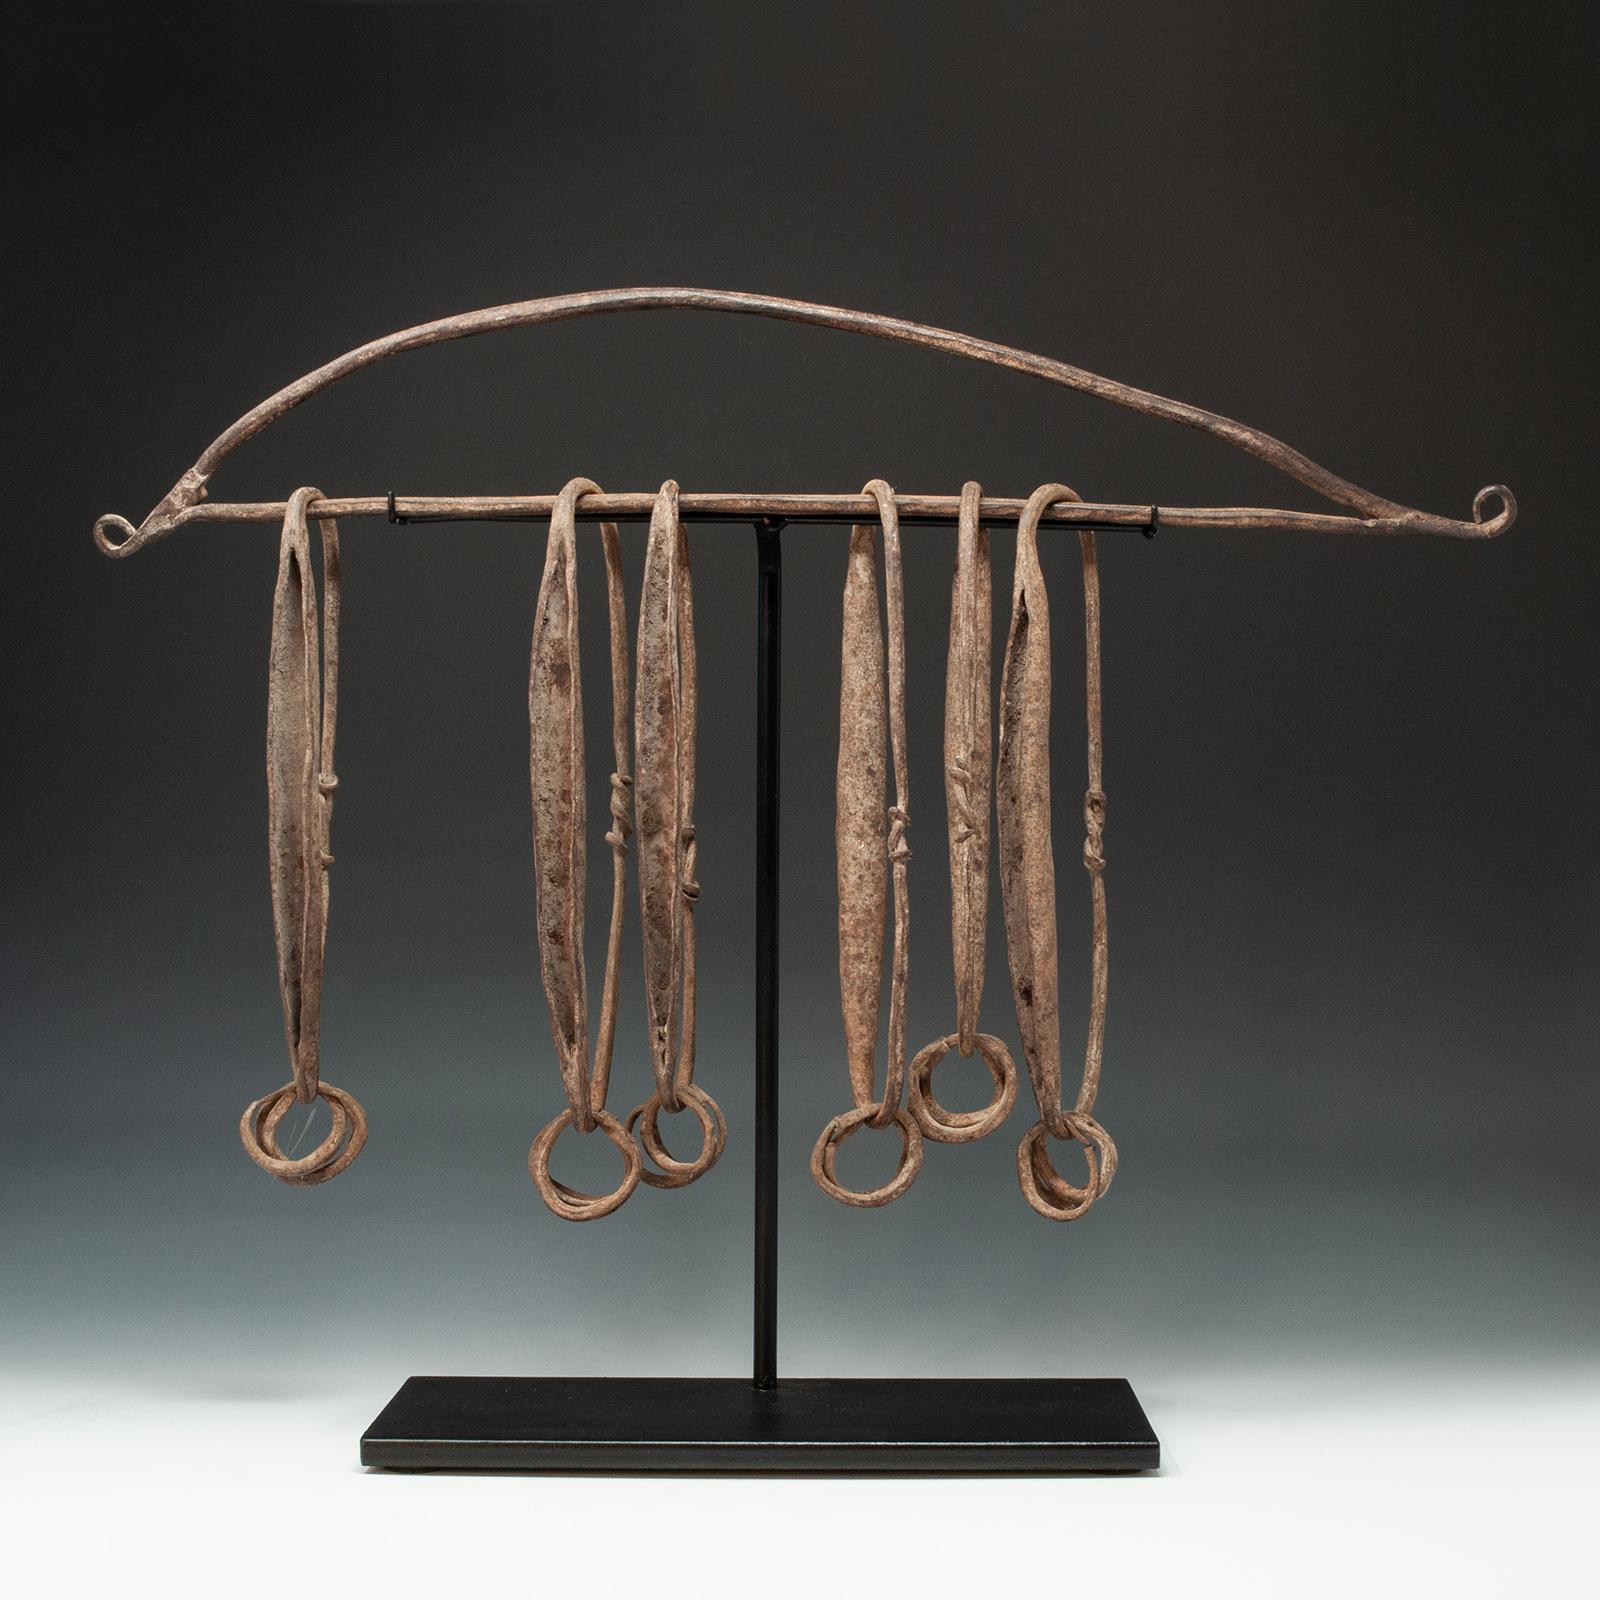 Forged iron currency, Chamba people, Northeastern Nigeria

A piece of traditional currency used for barter or exchange, it measures 15 inches (38 cm) high by 18 inches (45.7 cm) wide, as based, which is included with purchase.


